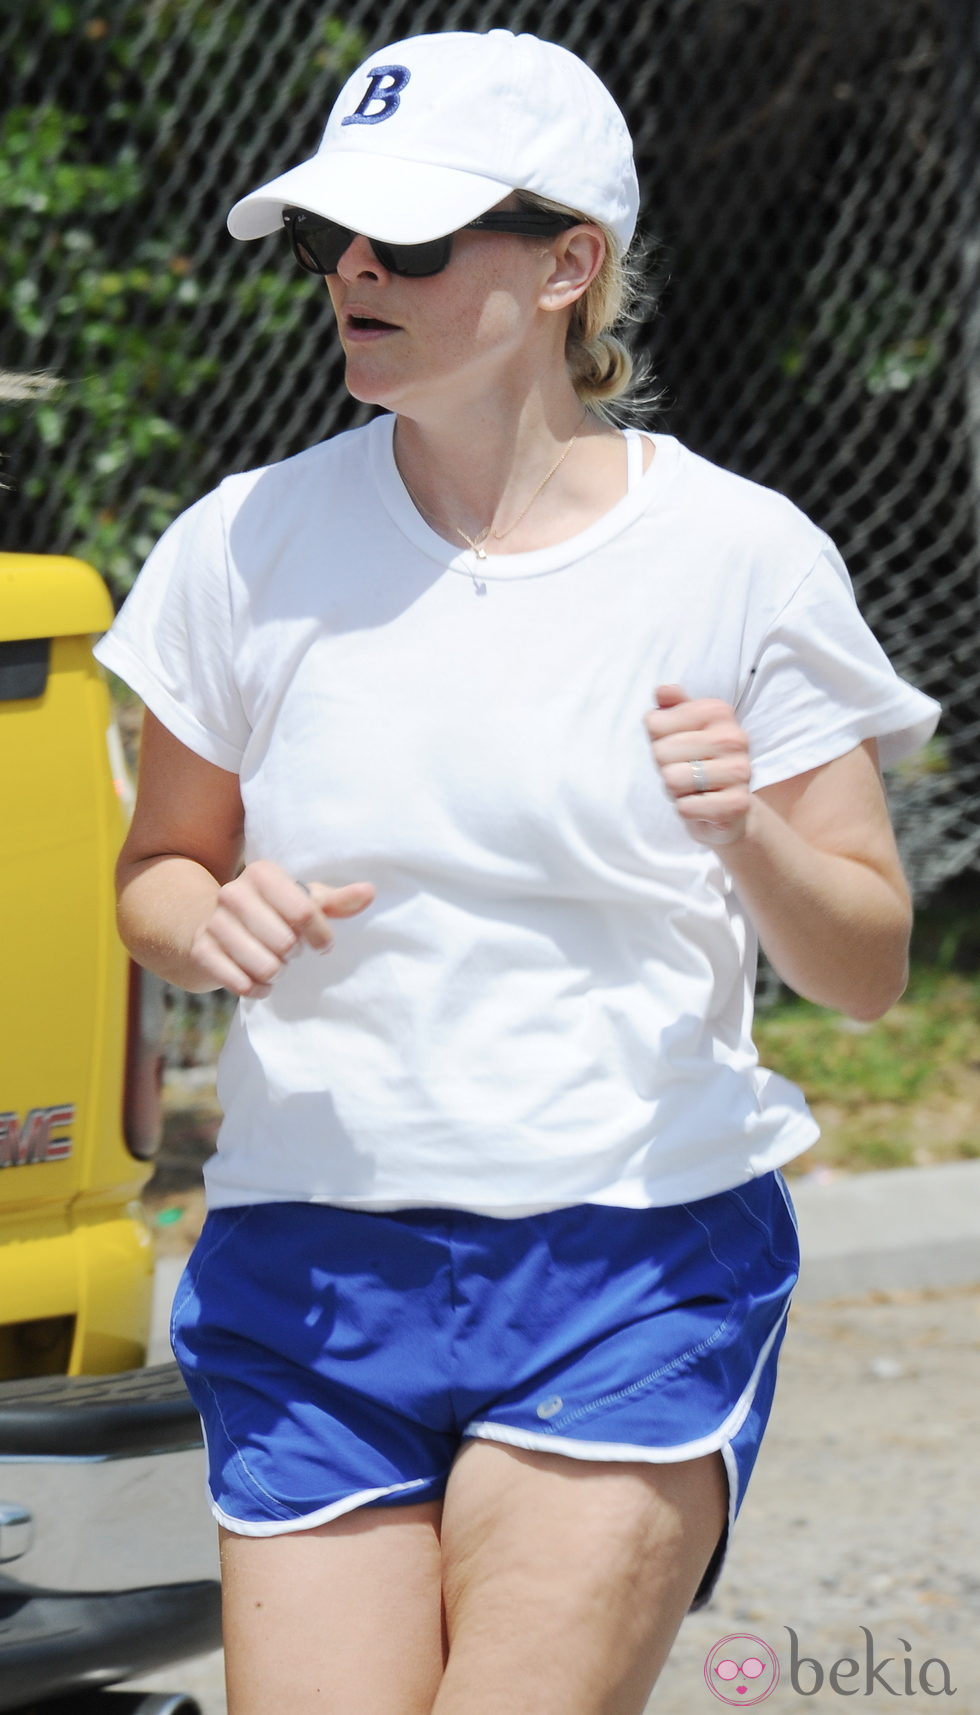 Reese Witherspoon hace deporte en shorts